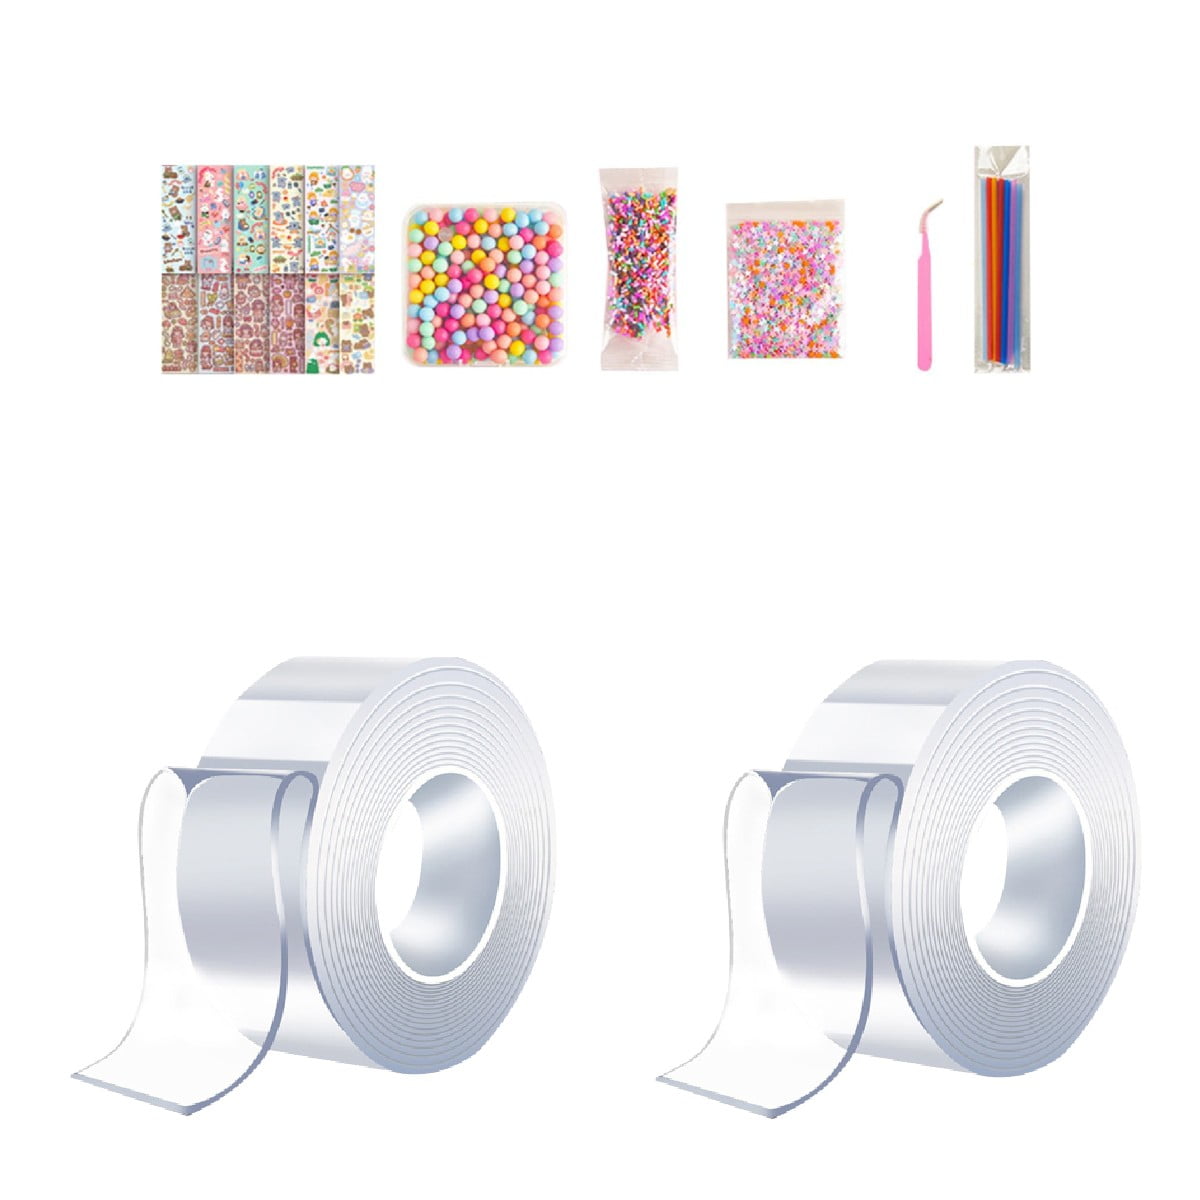 Double Sided Foam Tape (Pack of 3) - Crazy Craft - Crafty Arts